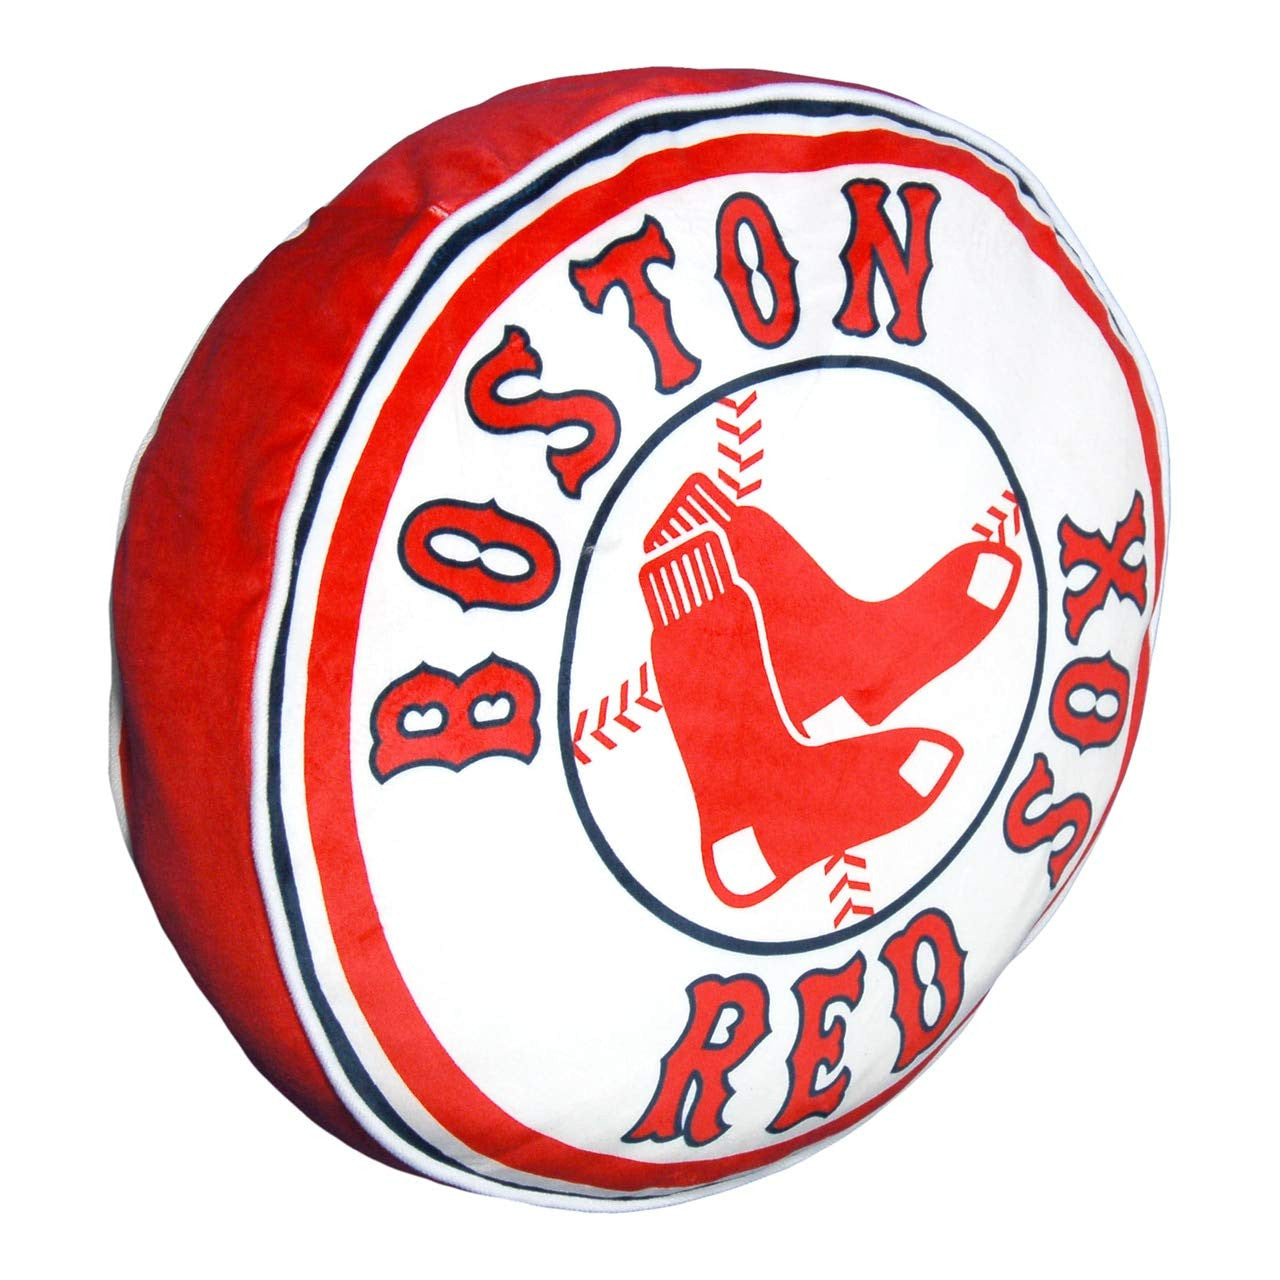 Boston Red Sox 15" Cloud Pillow by Northwest Company